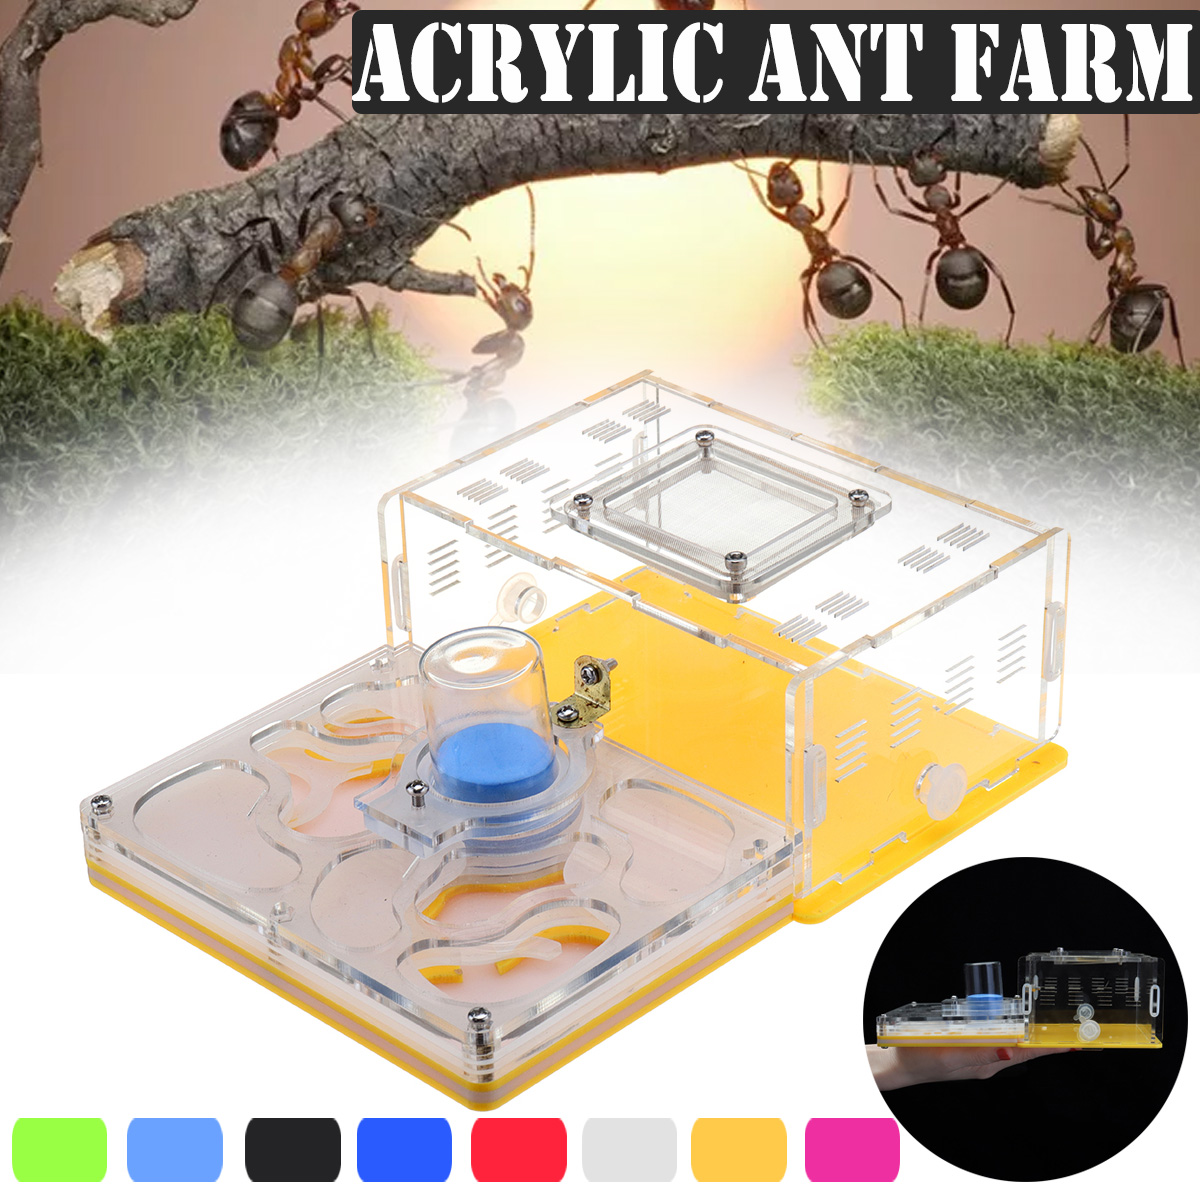 2021565cm-Acrylic-Sheet-Ant-Farm-Feeding-Insects-Science-Educations-1457997-1